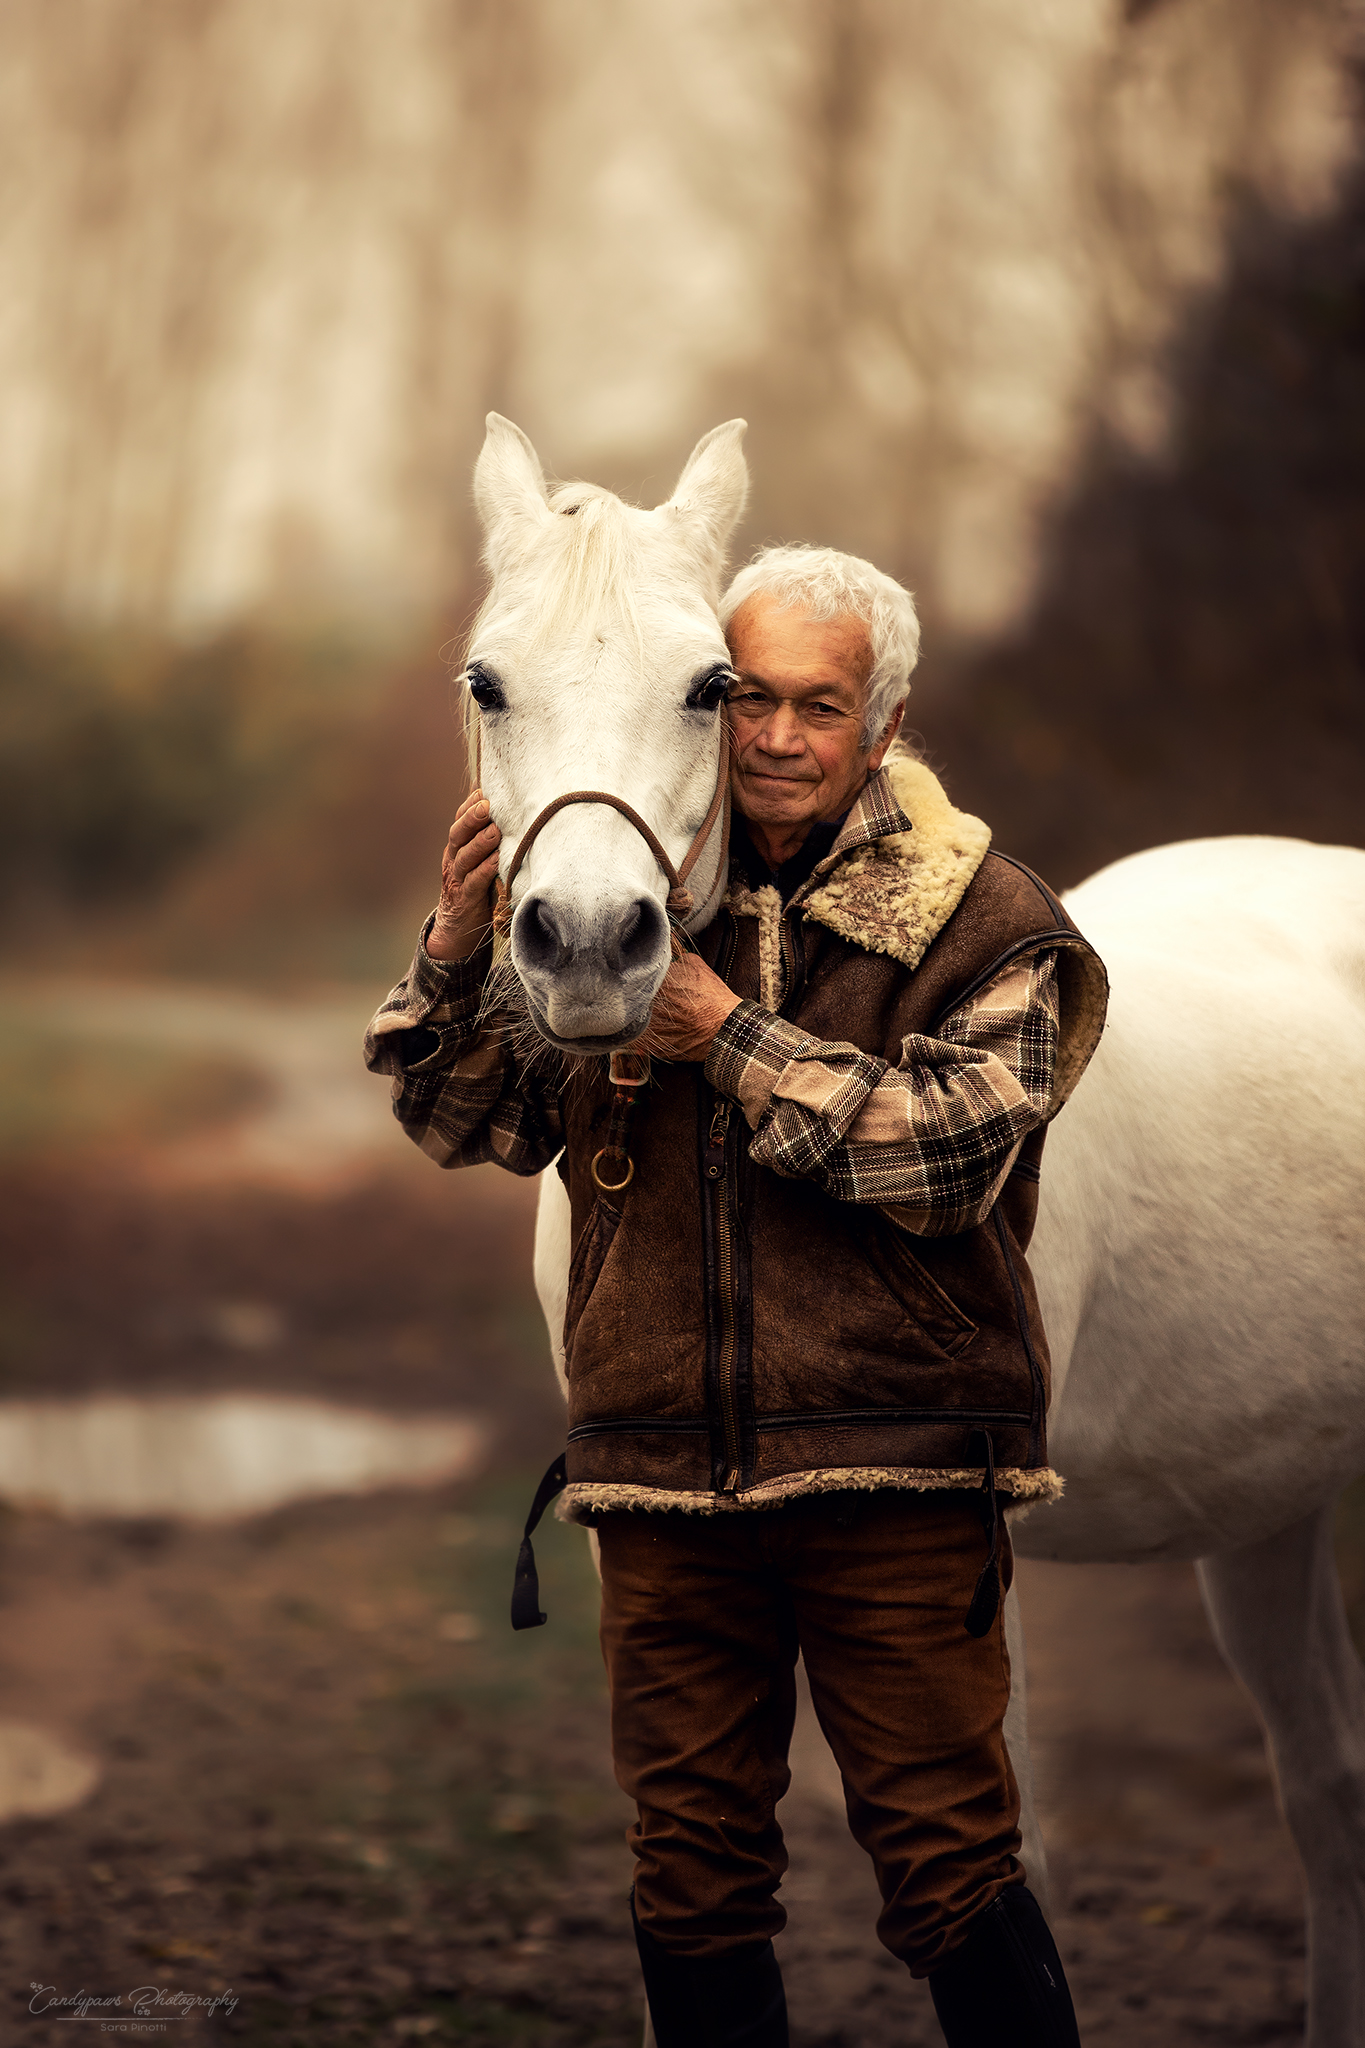 enrico and his infinite love for horses...